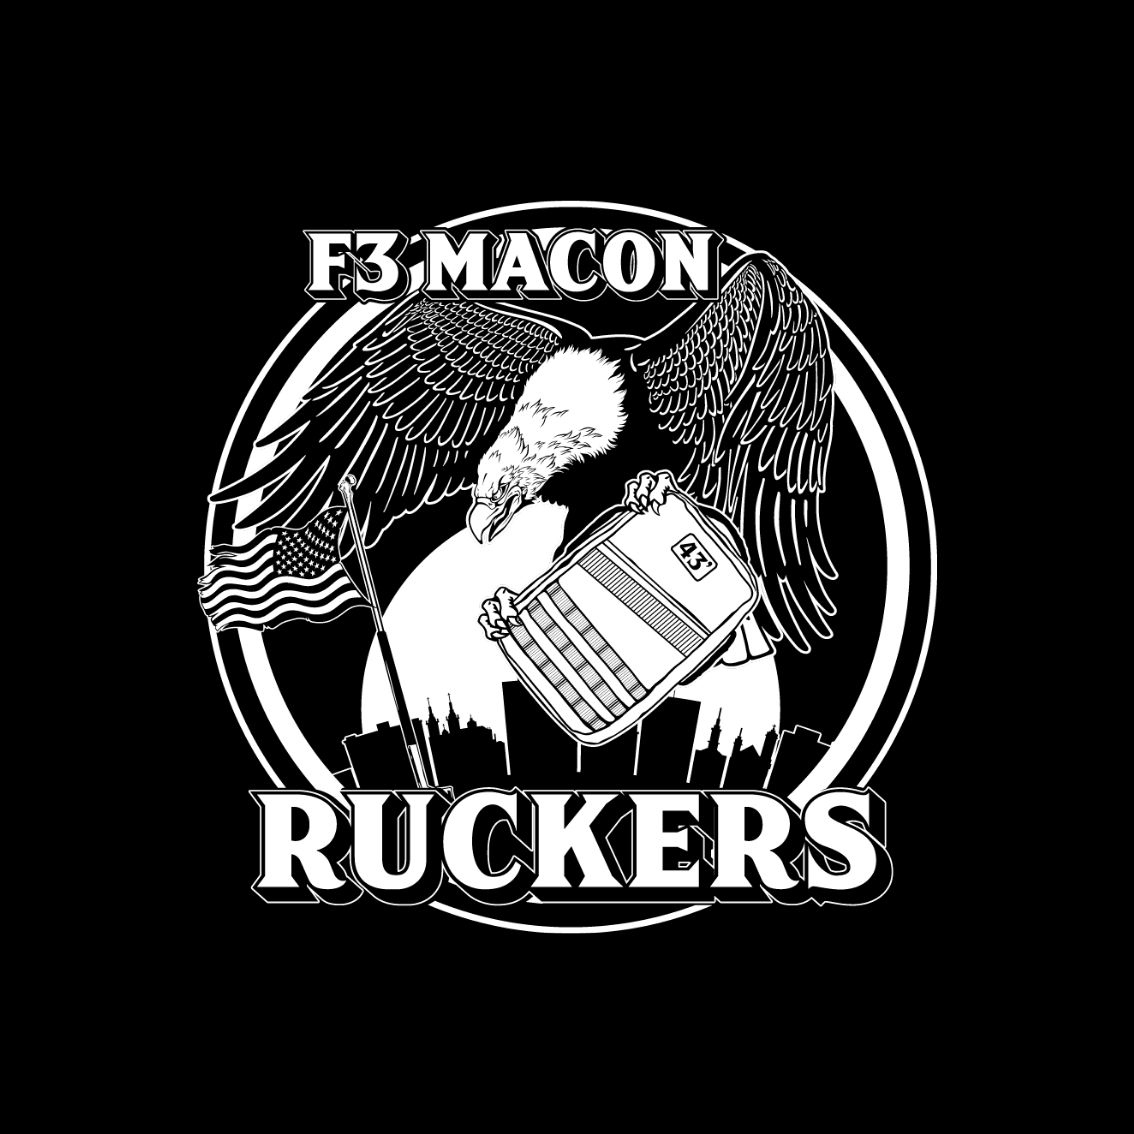 F3 Macon Ruckers Pre-Order May 2022